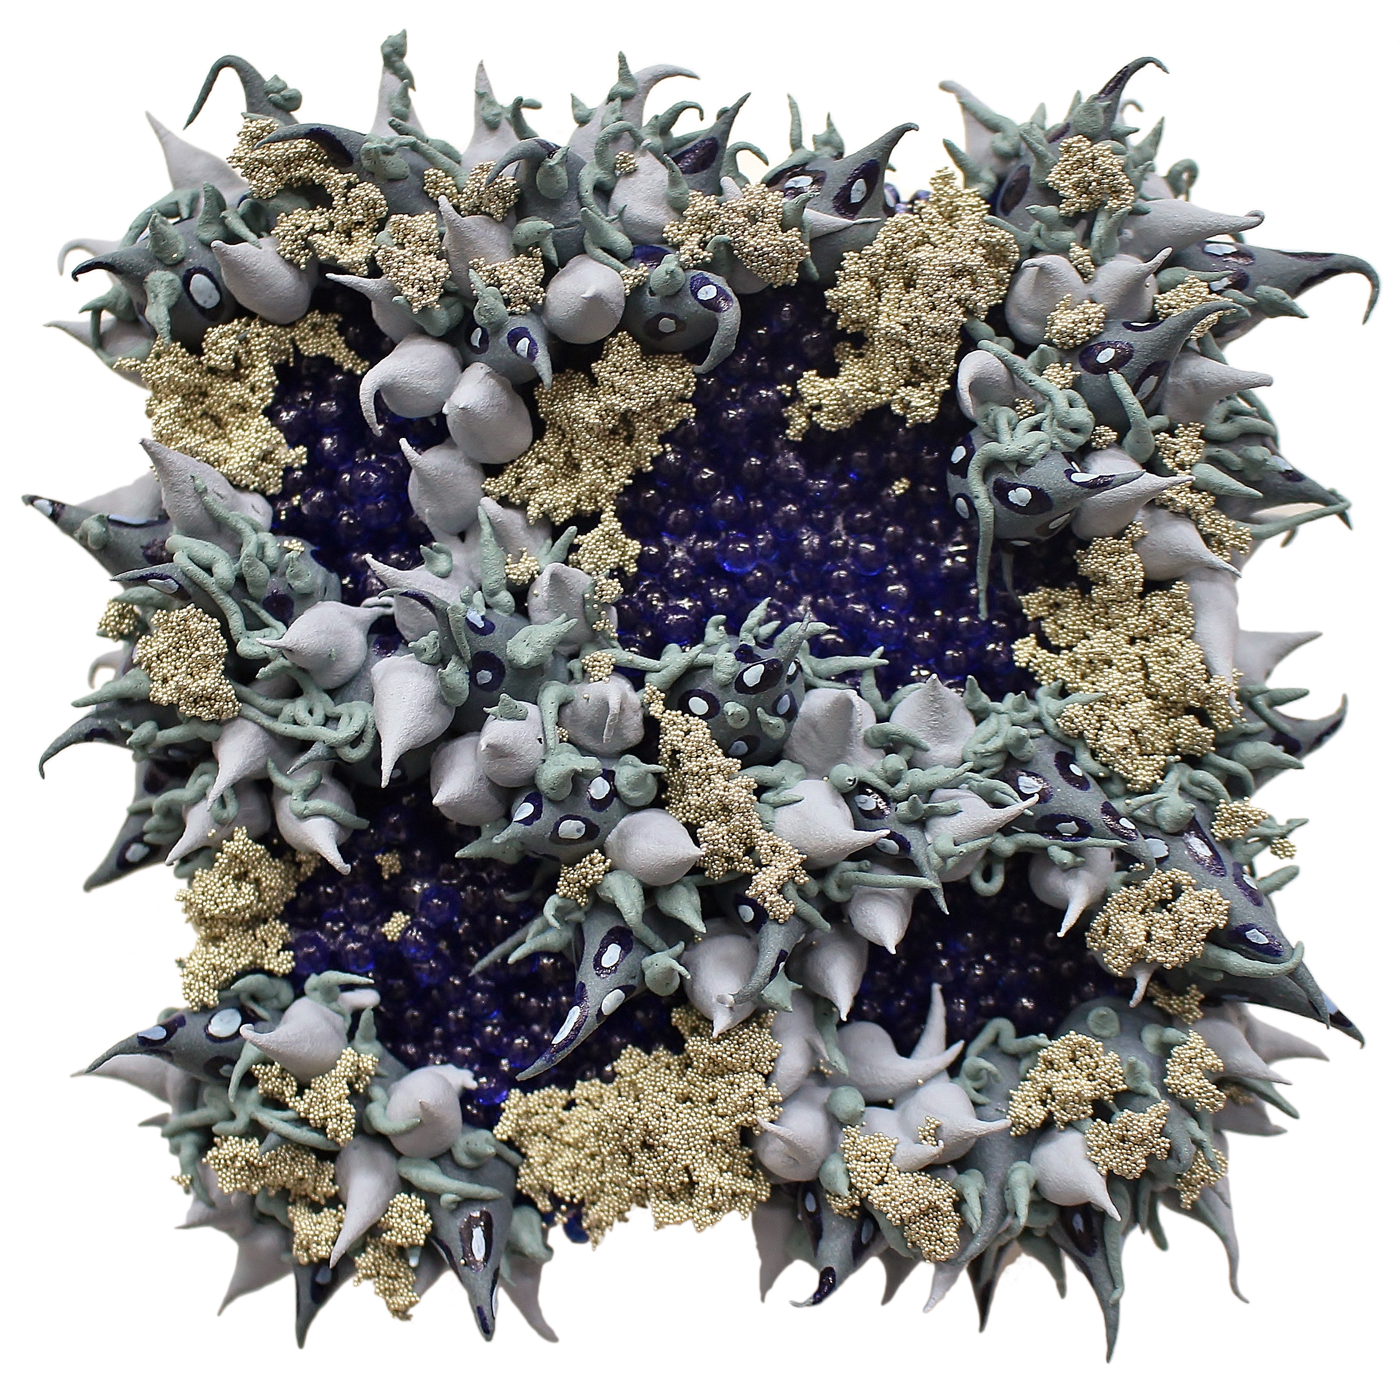 Quinquefolia, 2014, Ultralight, dispersions, glass beads and urethane on panel